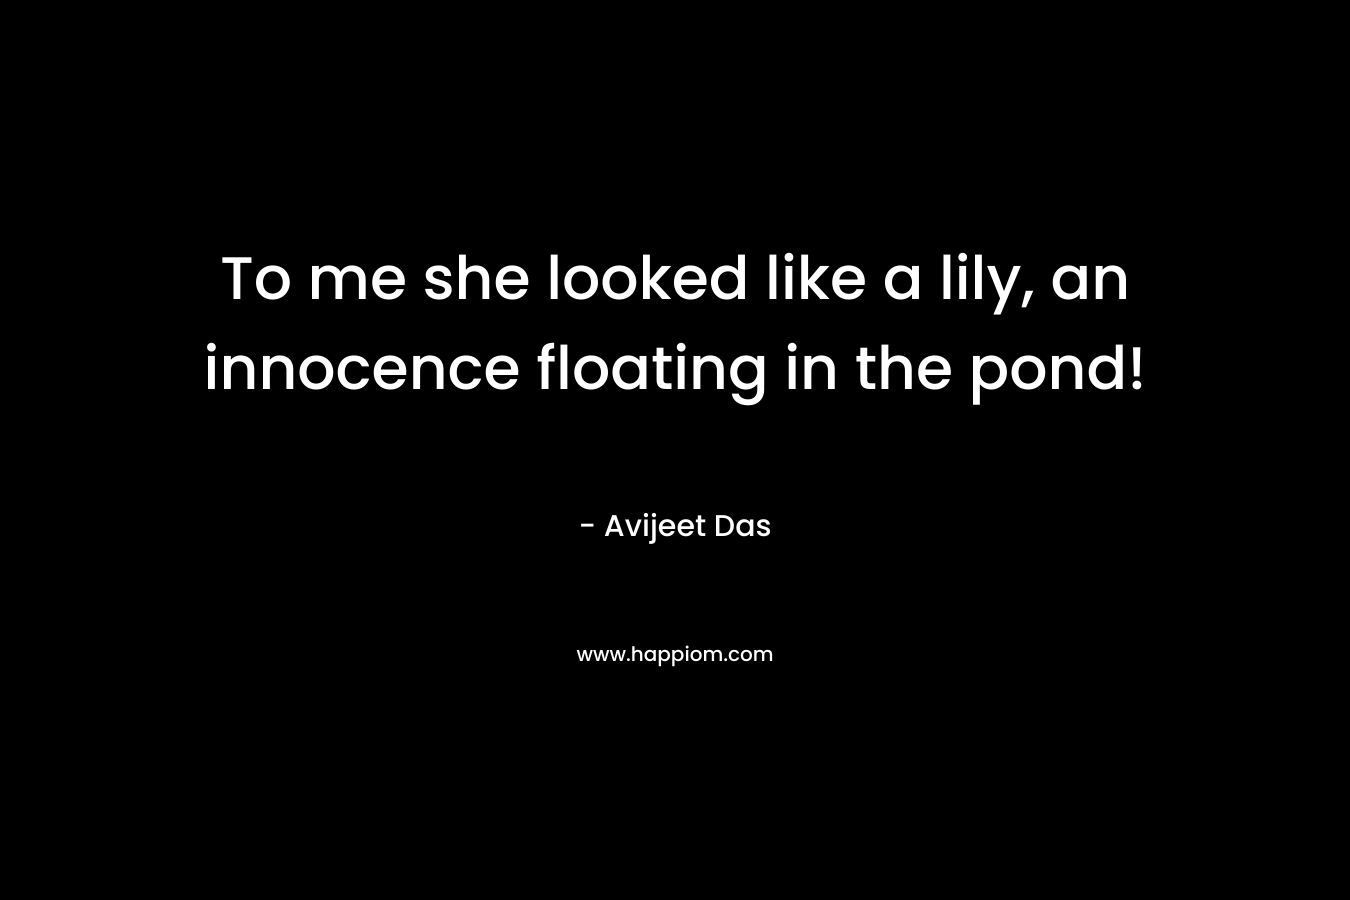 To me she looked like a lily, an innocence floating in the pond! – Avijeet Das